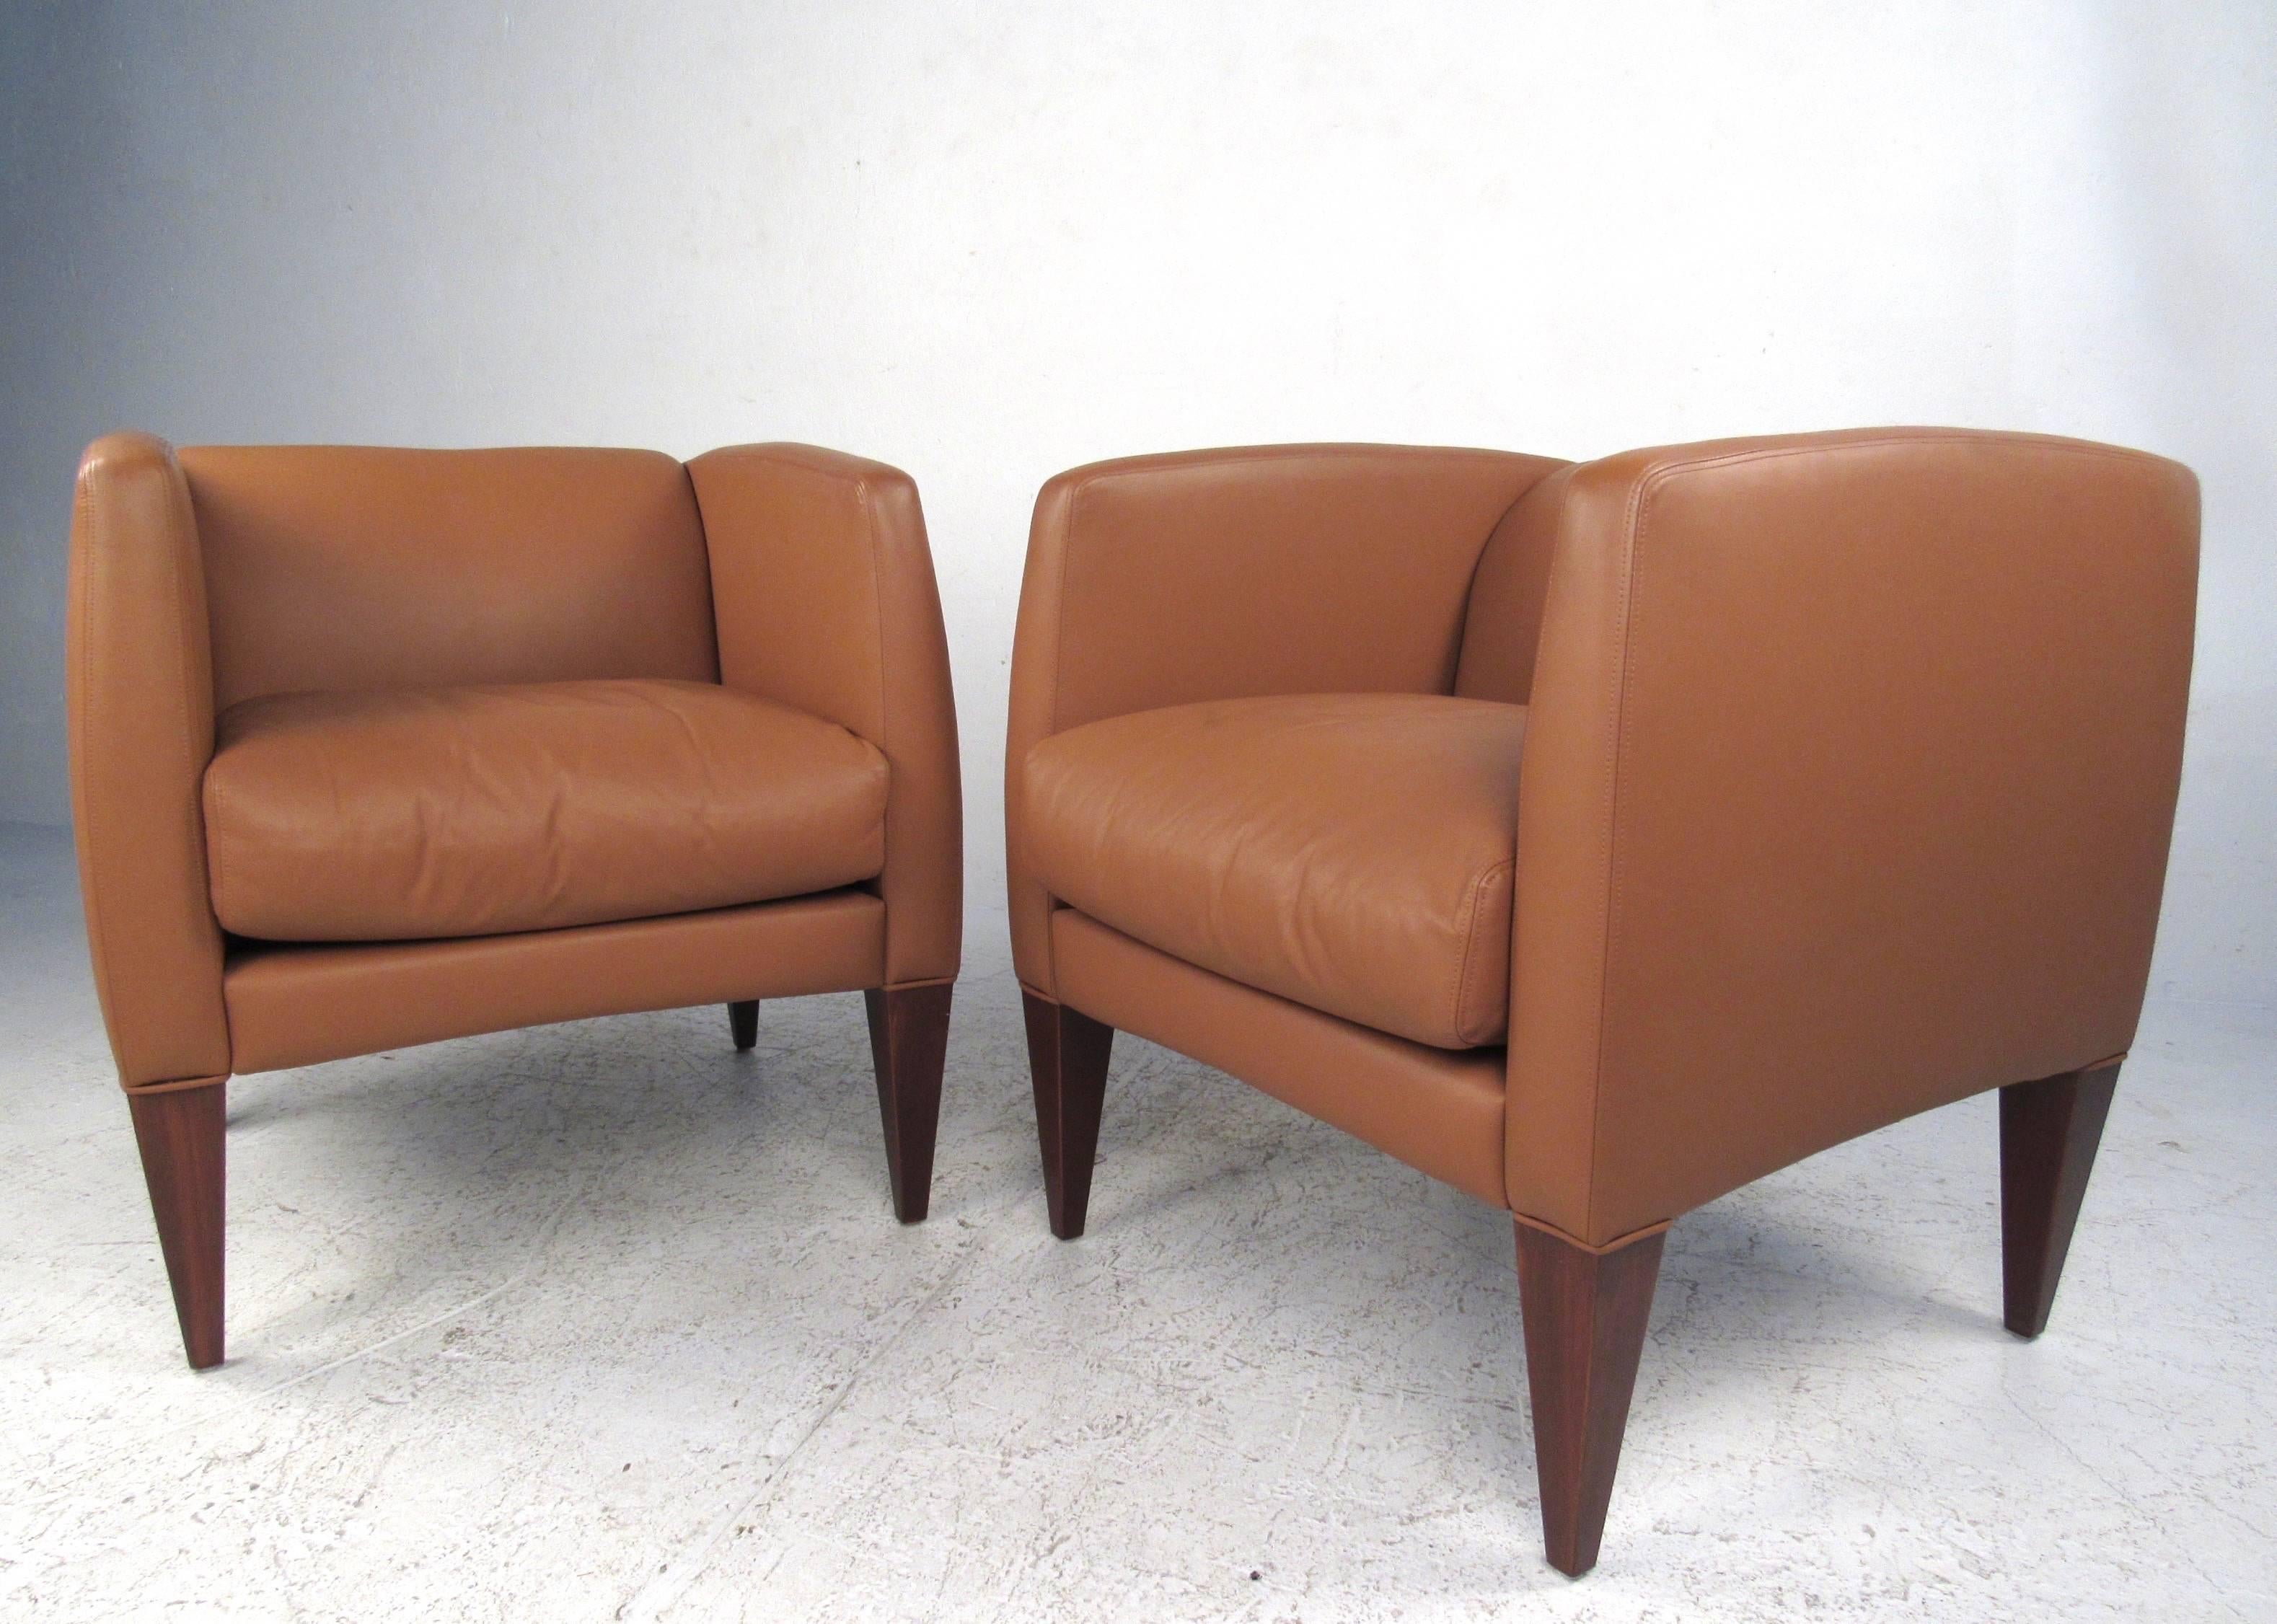 This stylish and comfortable pair of contemporary modern lounge chairs feature supple spinney beck Italian leather, tapered hardwood legs, and comfortable padded seat back. Matching pair is ideal for home or business use, and make a stylish yet